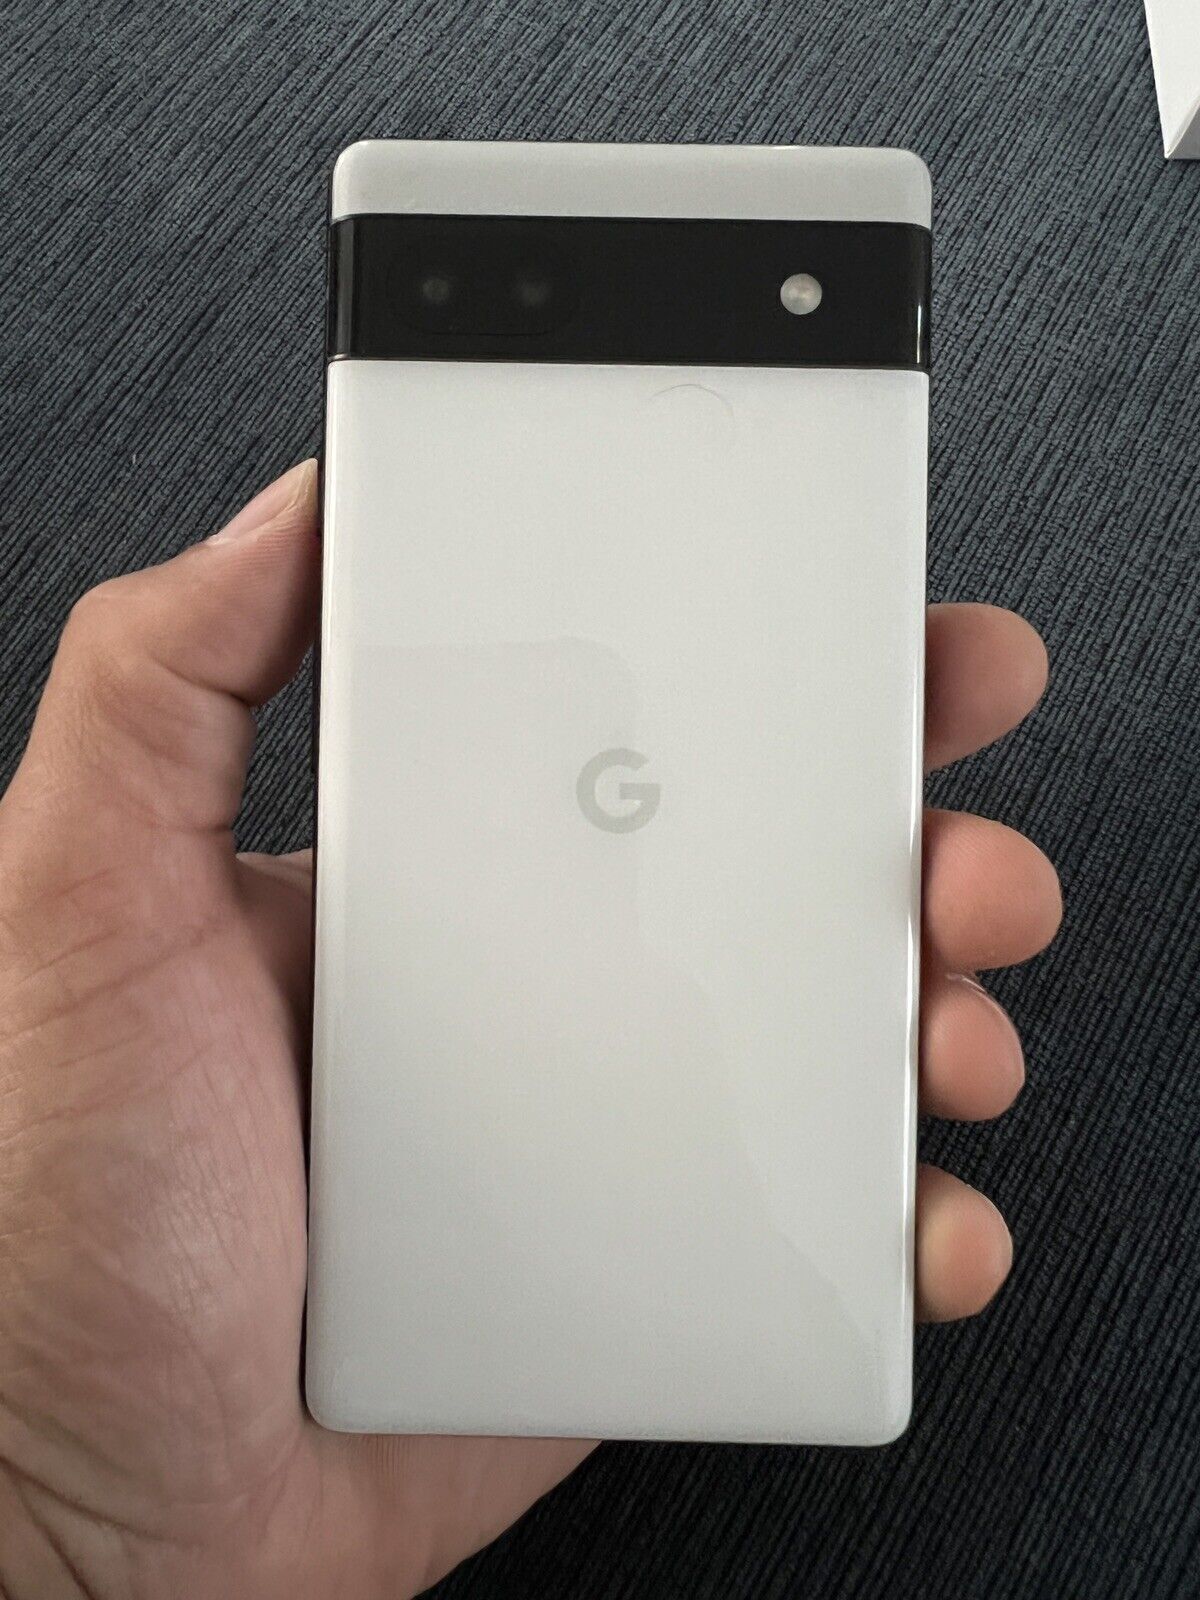 NEW! Google Pixel 6a 5G - 128GB Unlocked All Carriers (Charcoal 